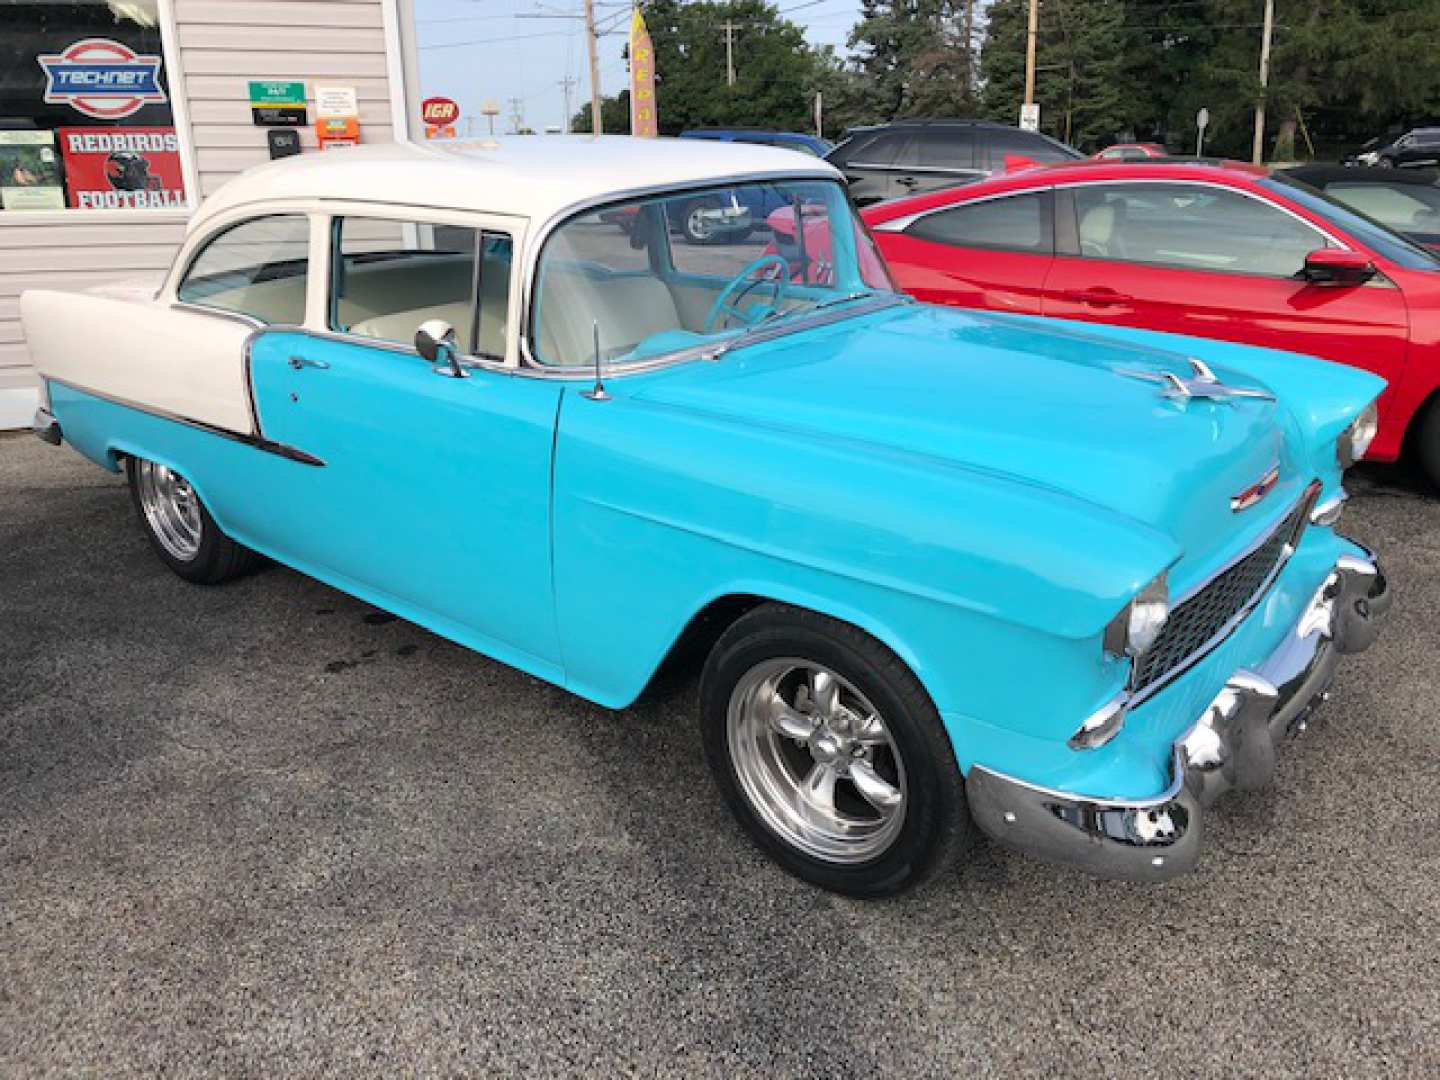 5th Image of a 1955 CHEVROLET RESTOMOD